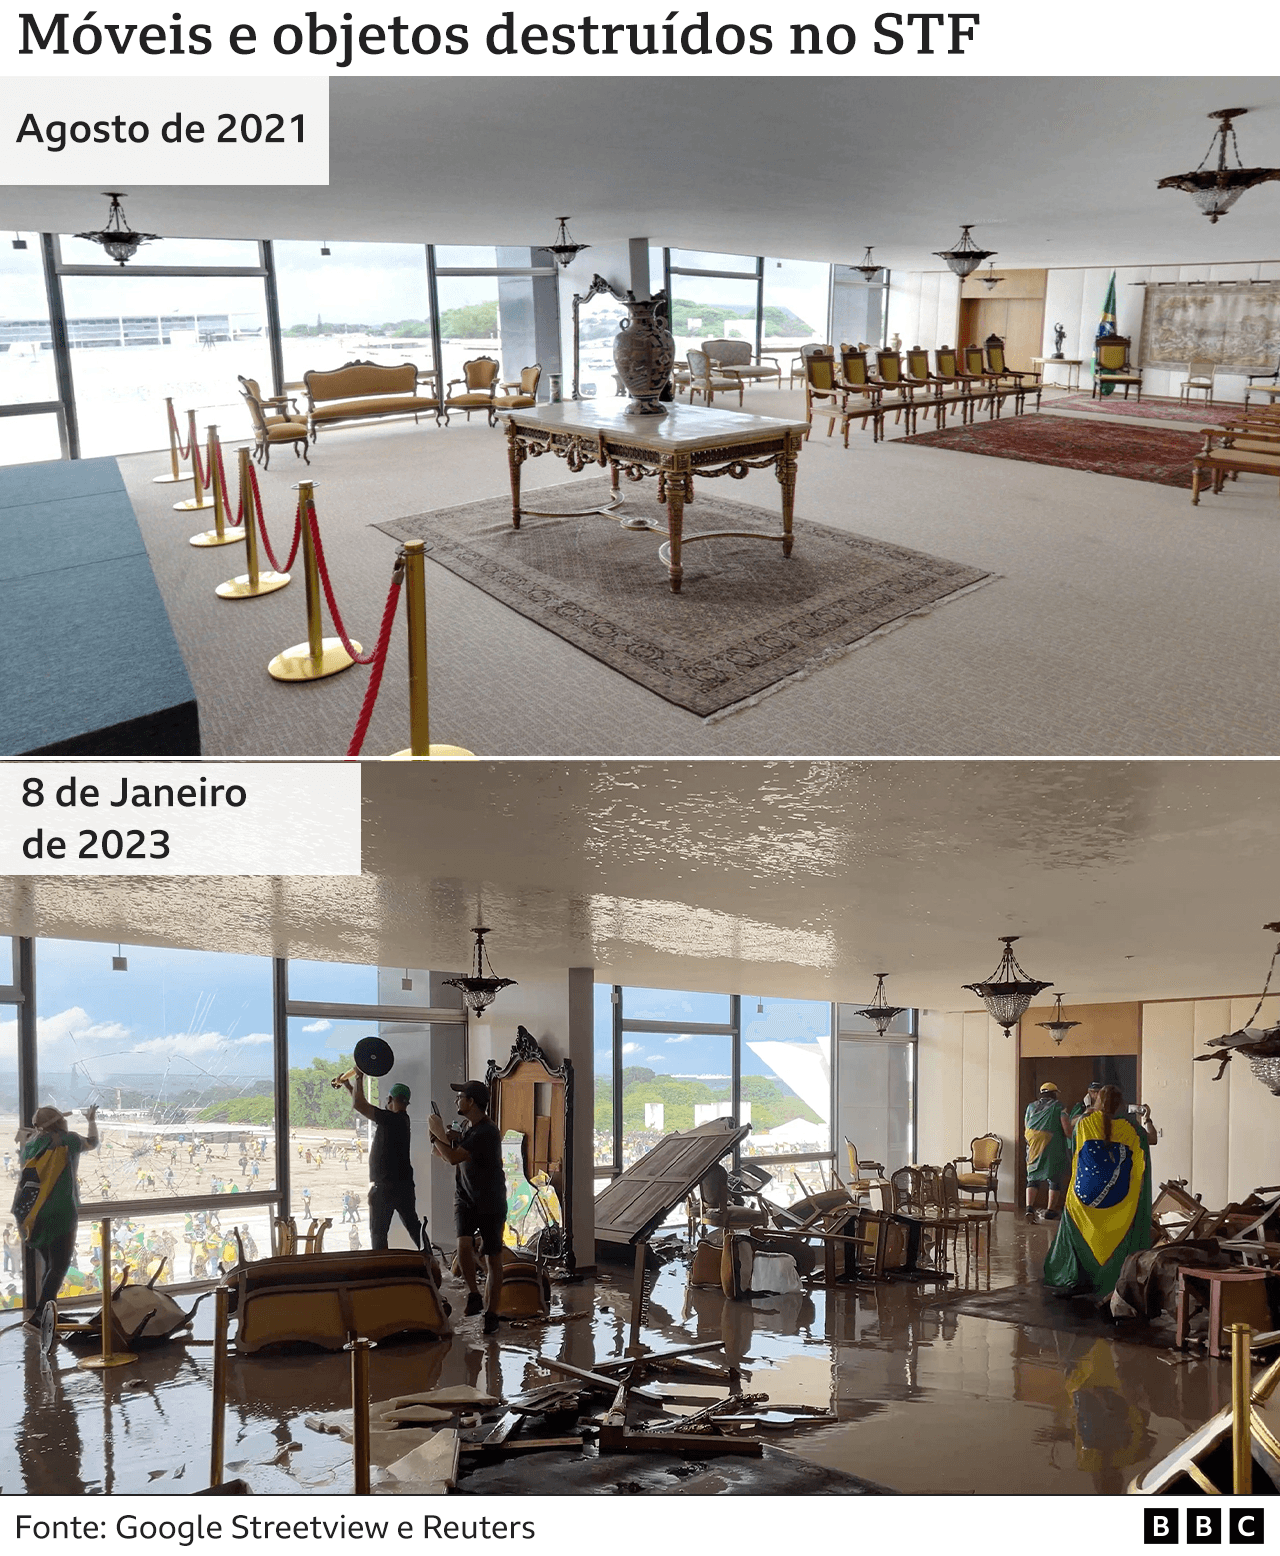 Interior environment of the STF building in August 2021 and destroyed furniture on January 8, 2023